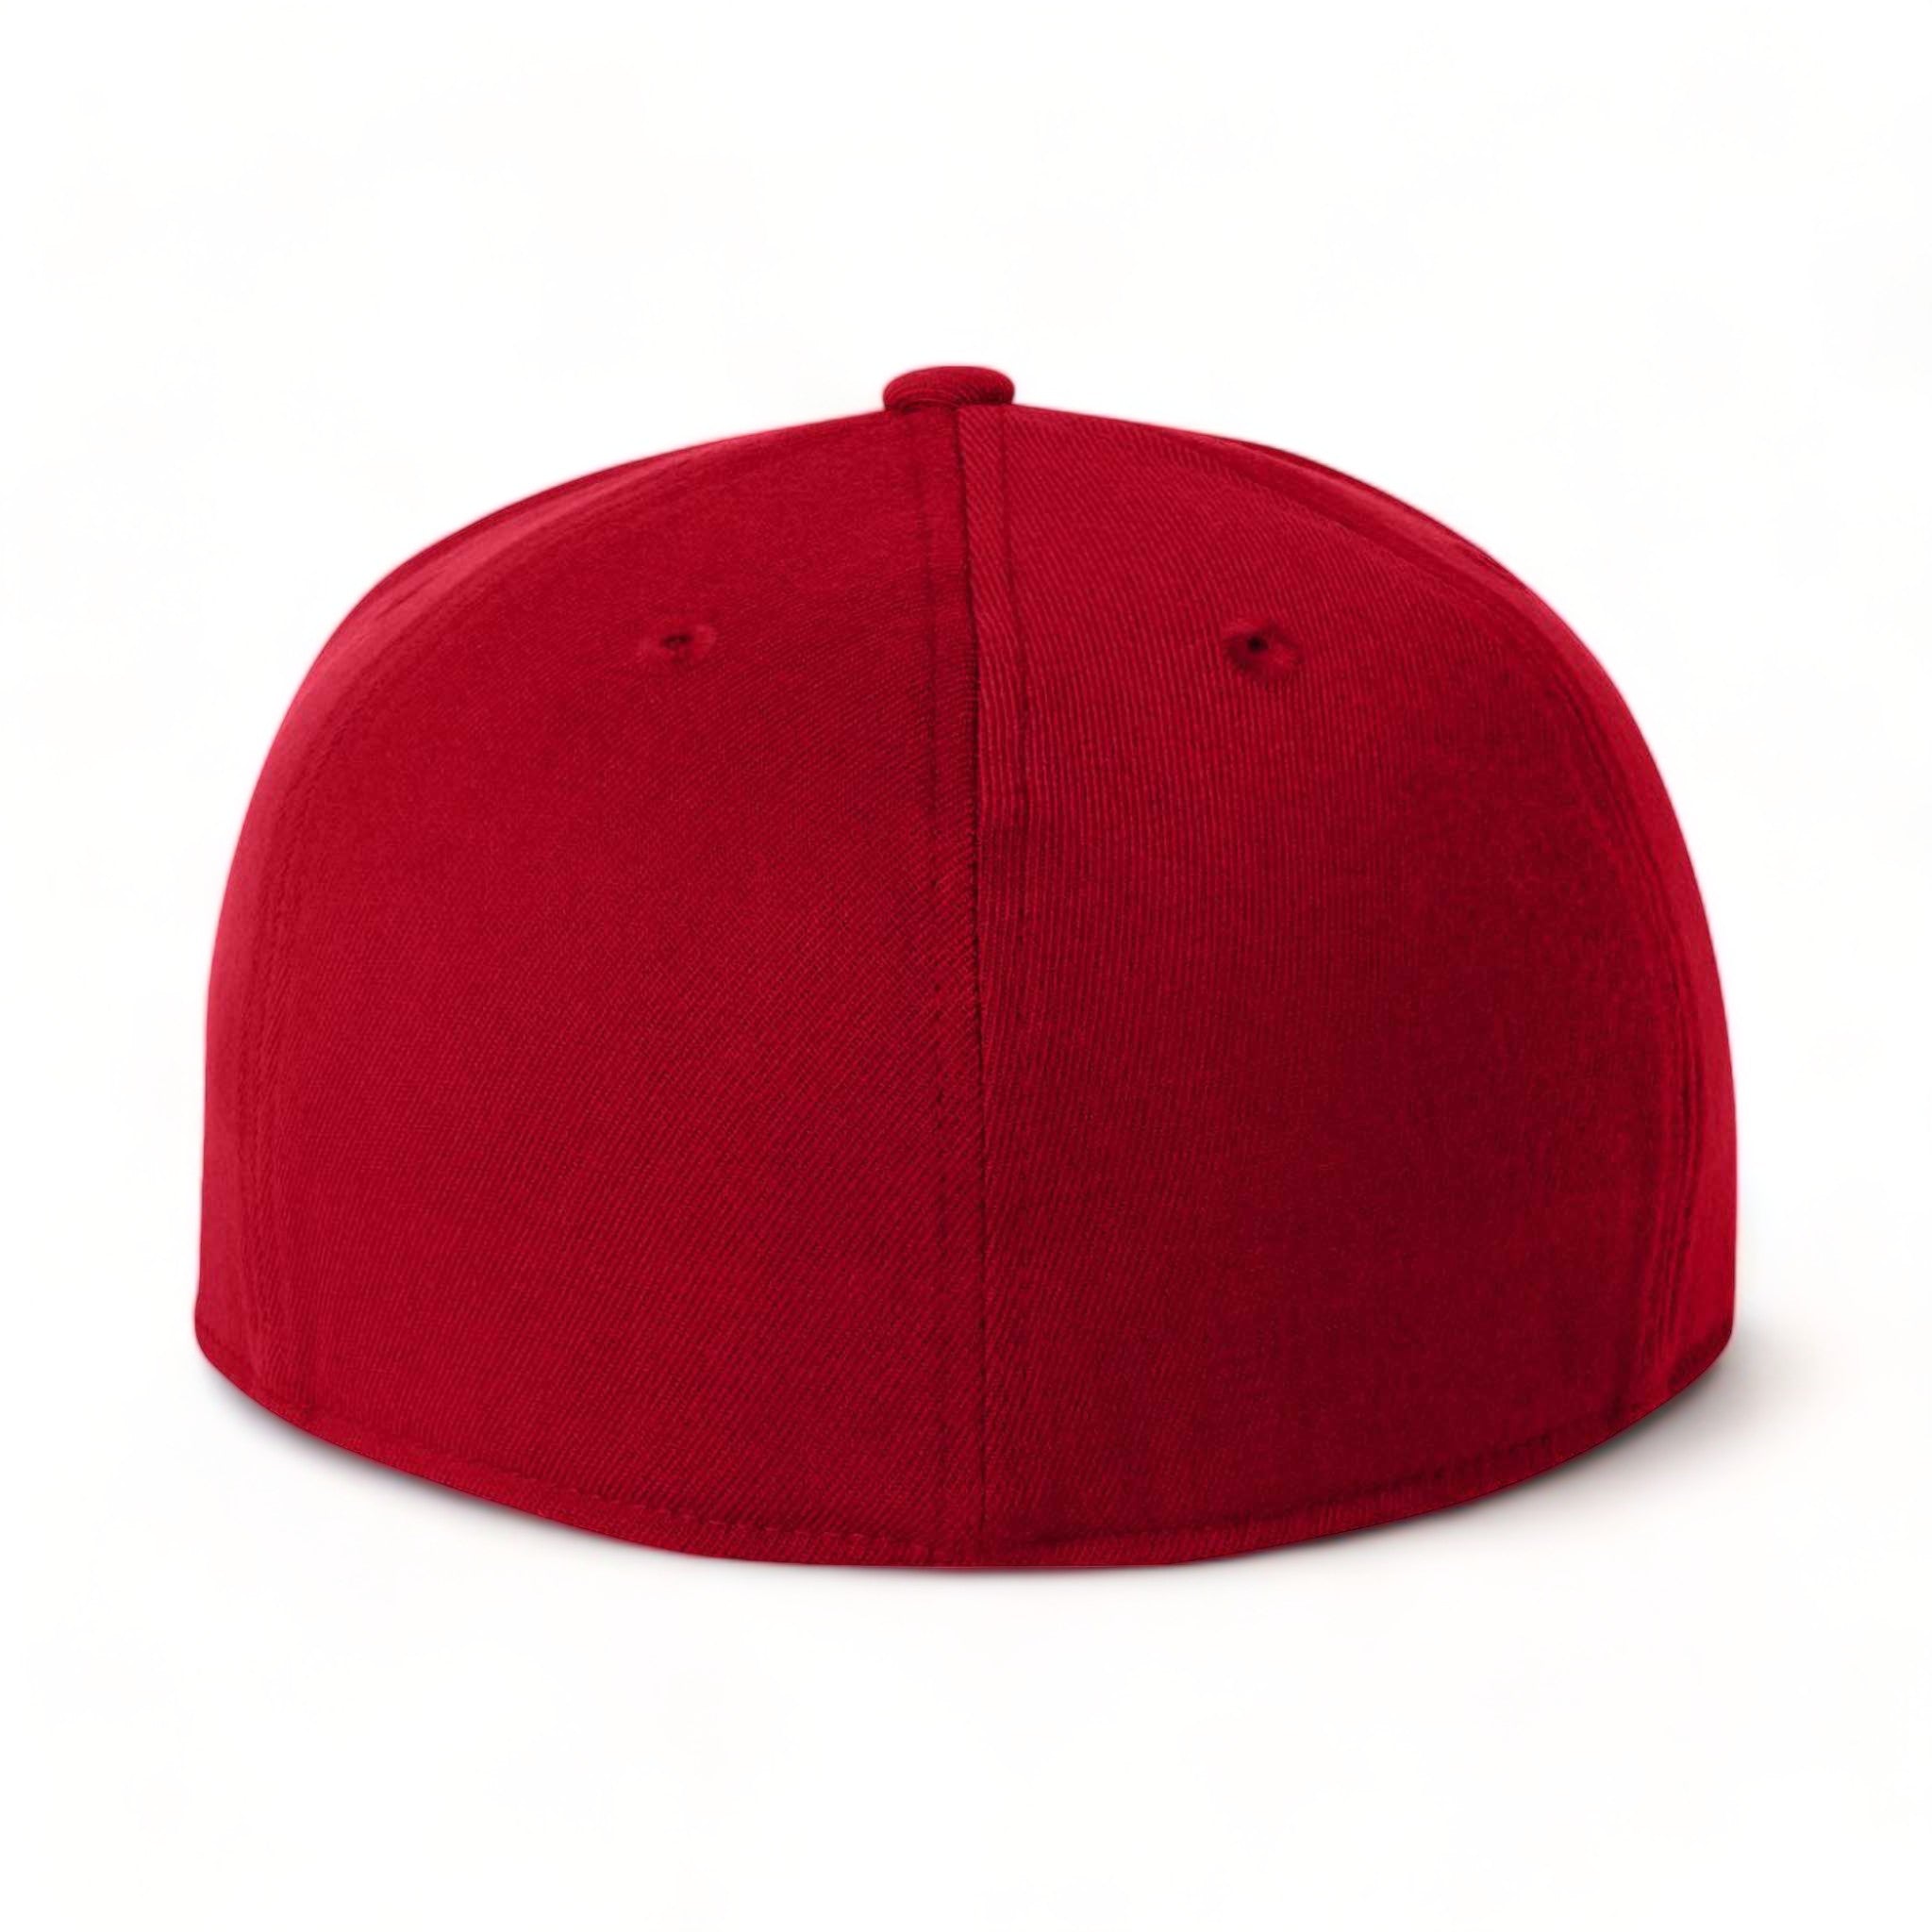 Back view of Flexfit 6210FF custom hat in red